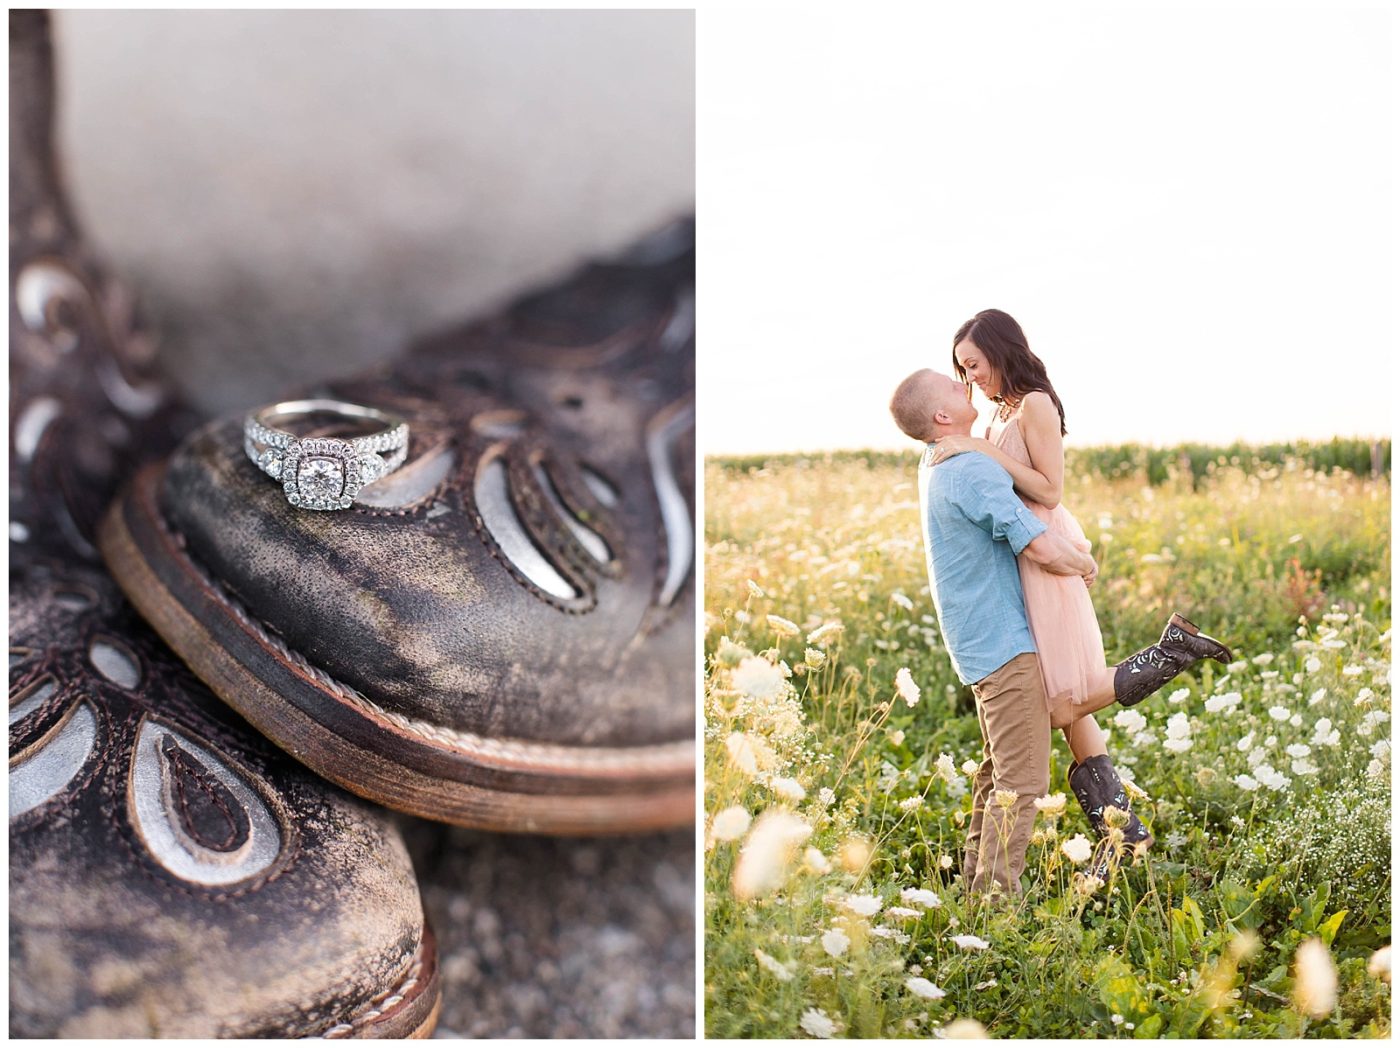 Photo of an engagement ring on cowboy boot for an adorable country engagement session 